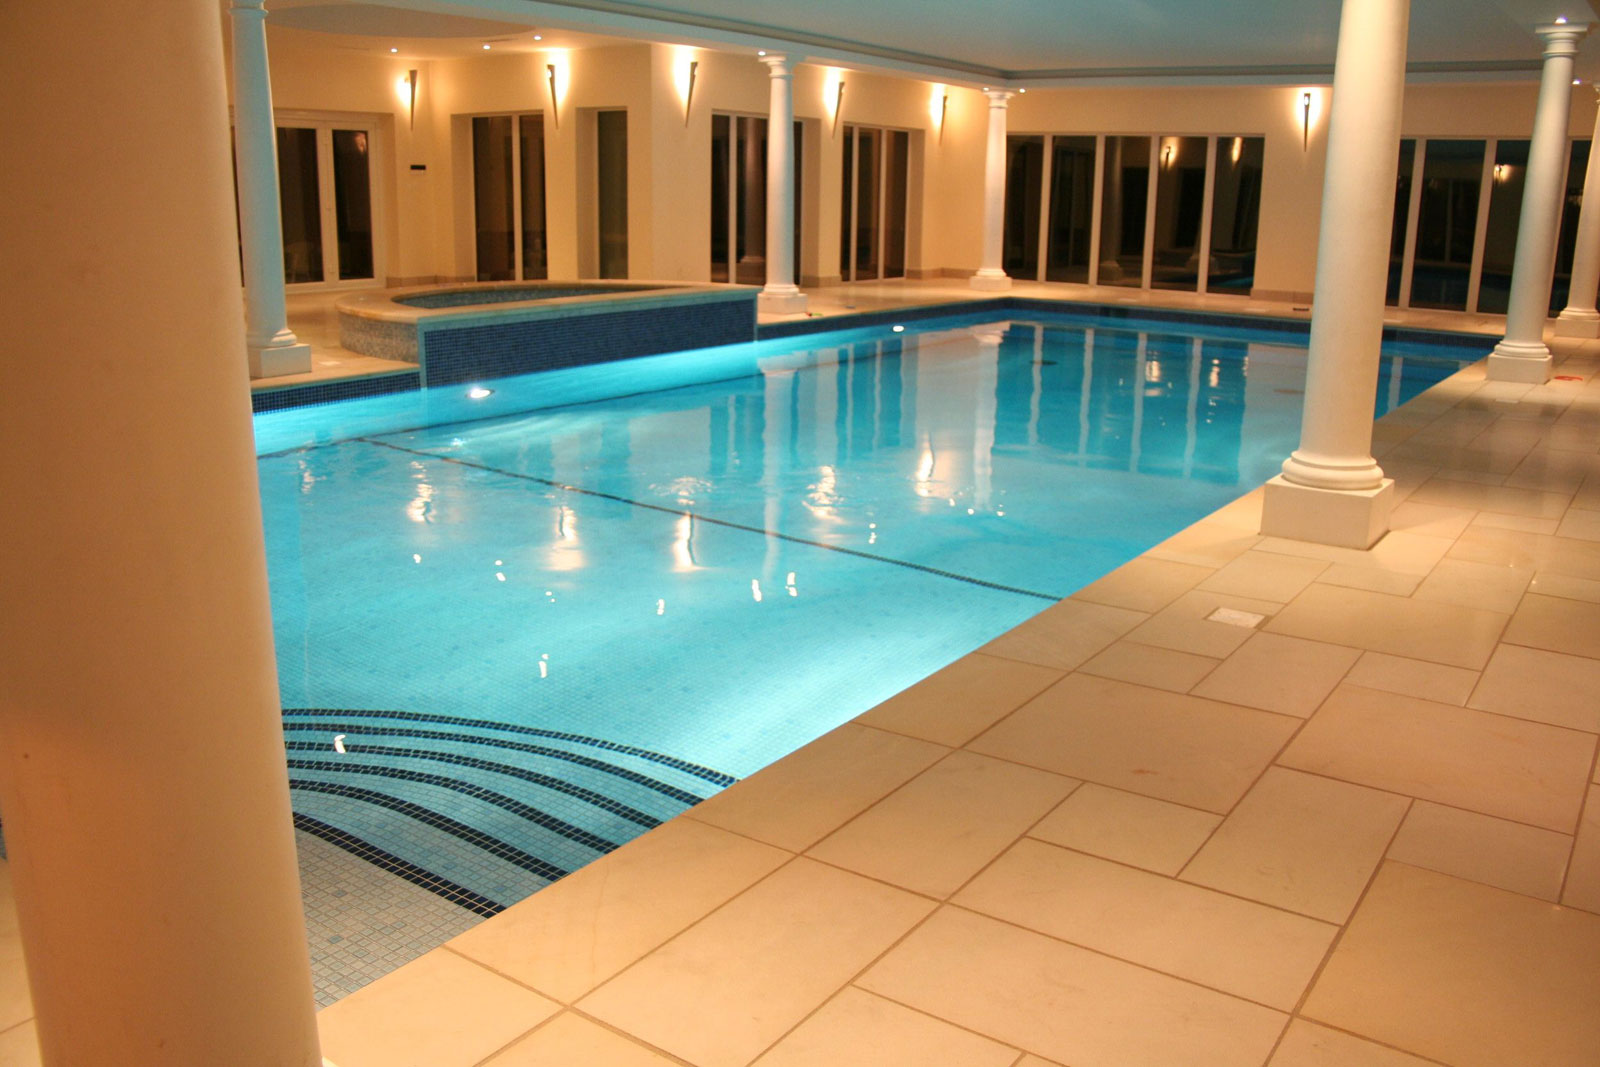 Swimming Pool Modern Magnificent Indoor Swimming Pool Design Using Modern Classical Touch With Pillar Decor And Concrete Tile Floor Edging For Inspiration Pool Indoor Swimming Pool Covered In Awesomeness